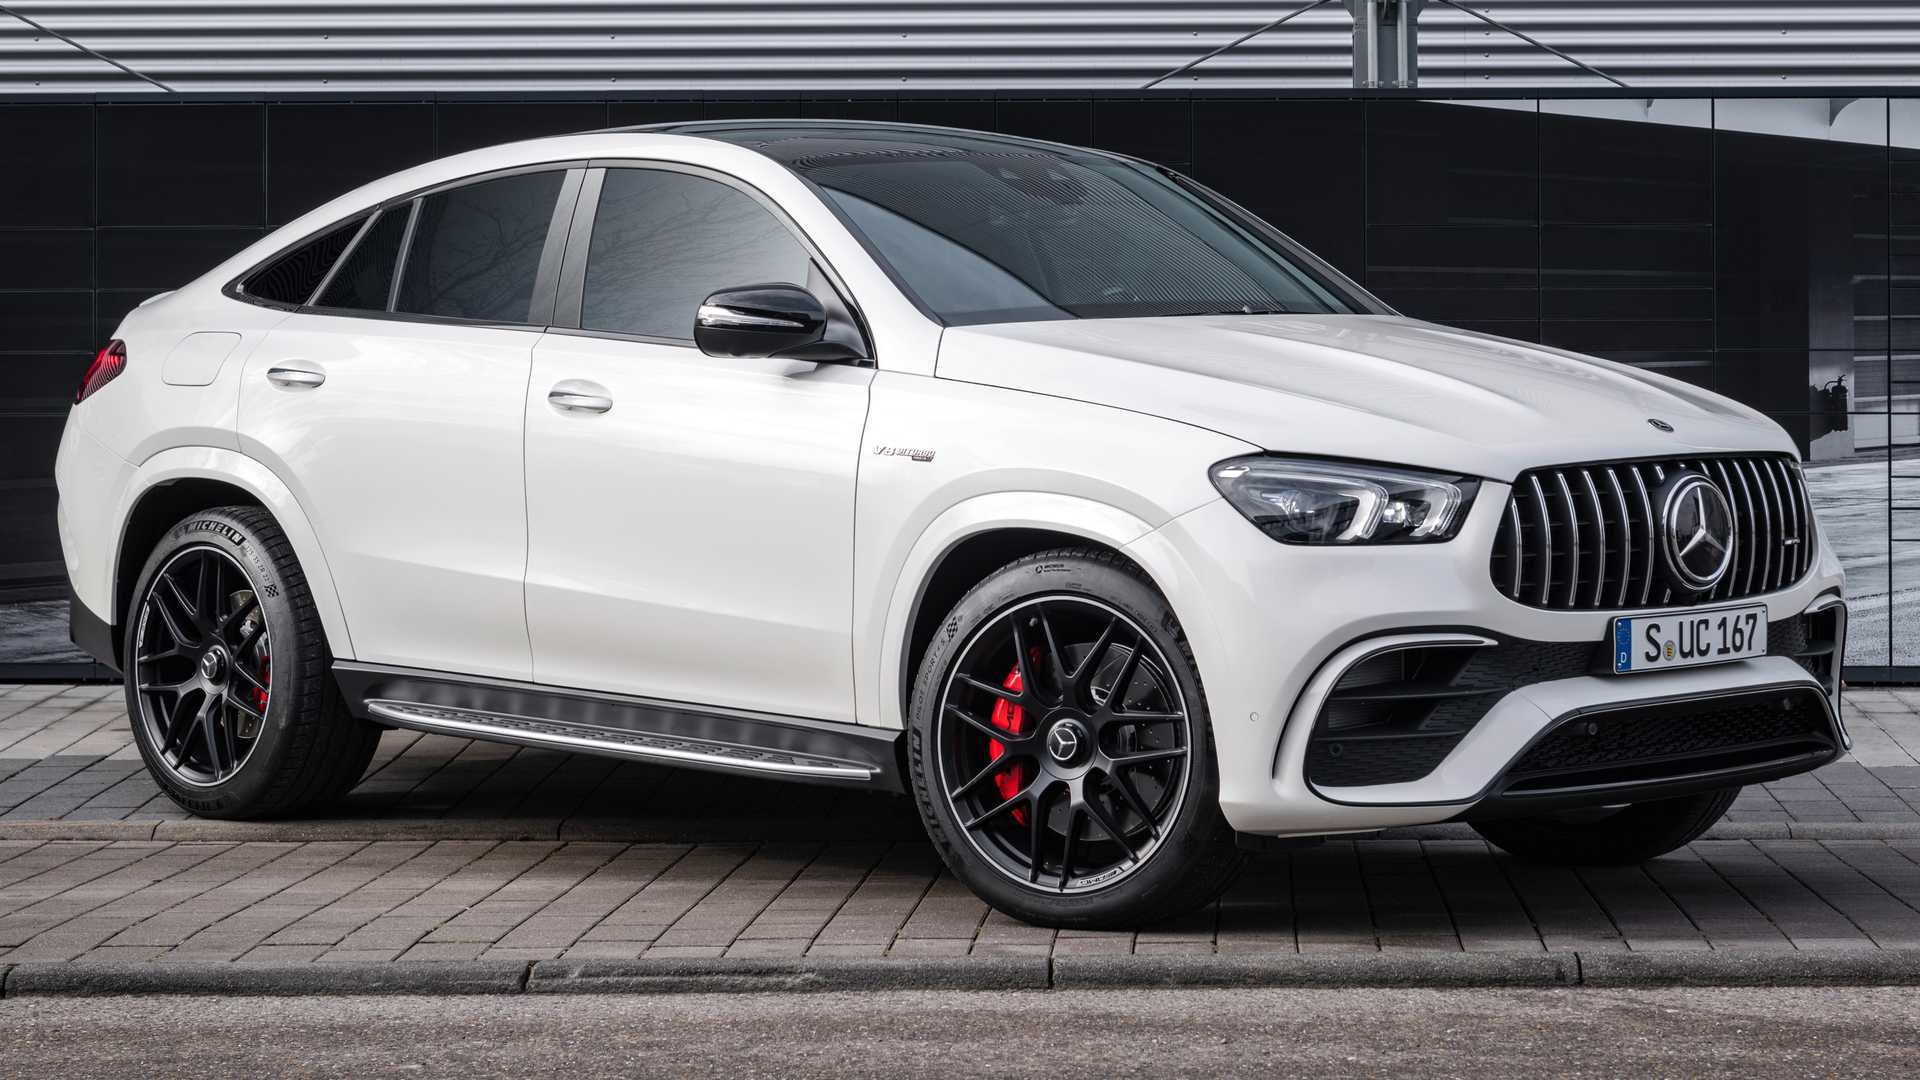 2021 Mercedes-AMG GLE63 S Coupe Starts At $116,000